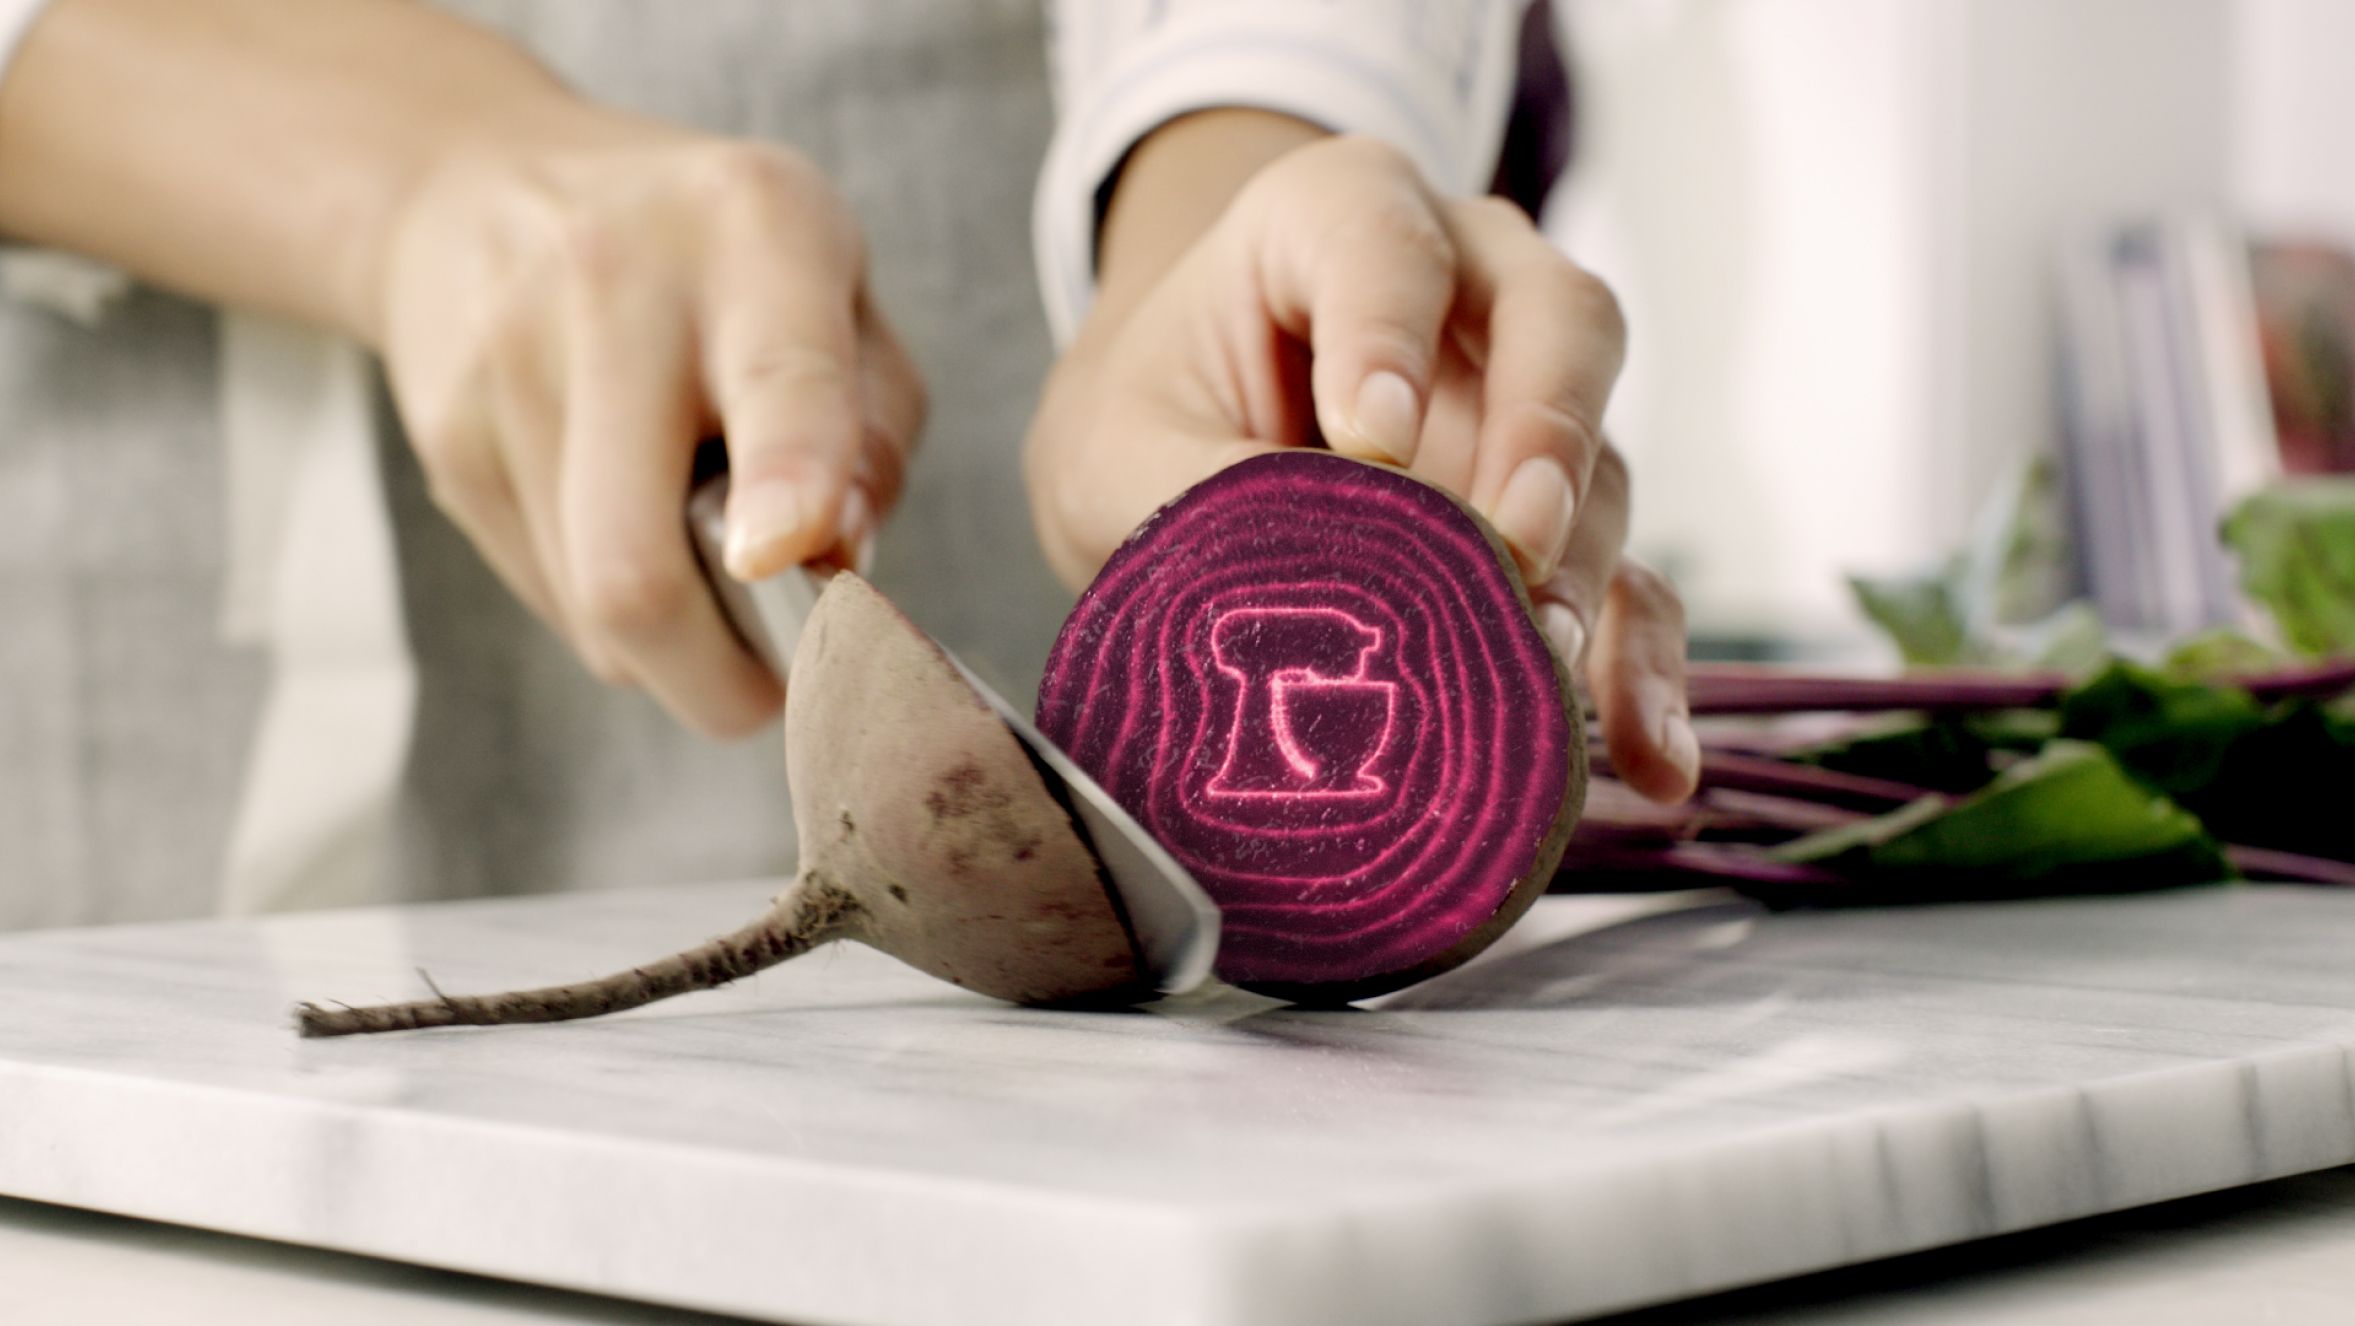 A person cutting into a beetroot.